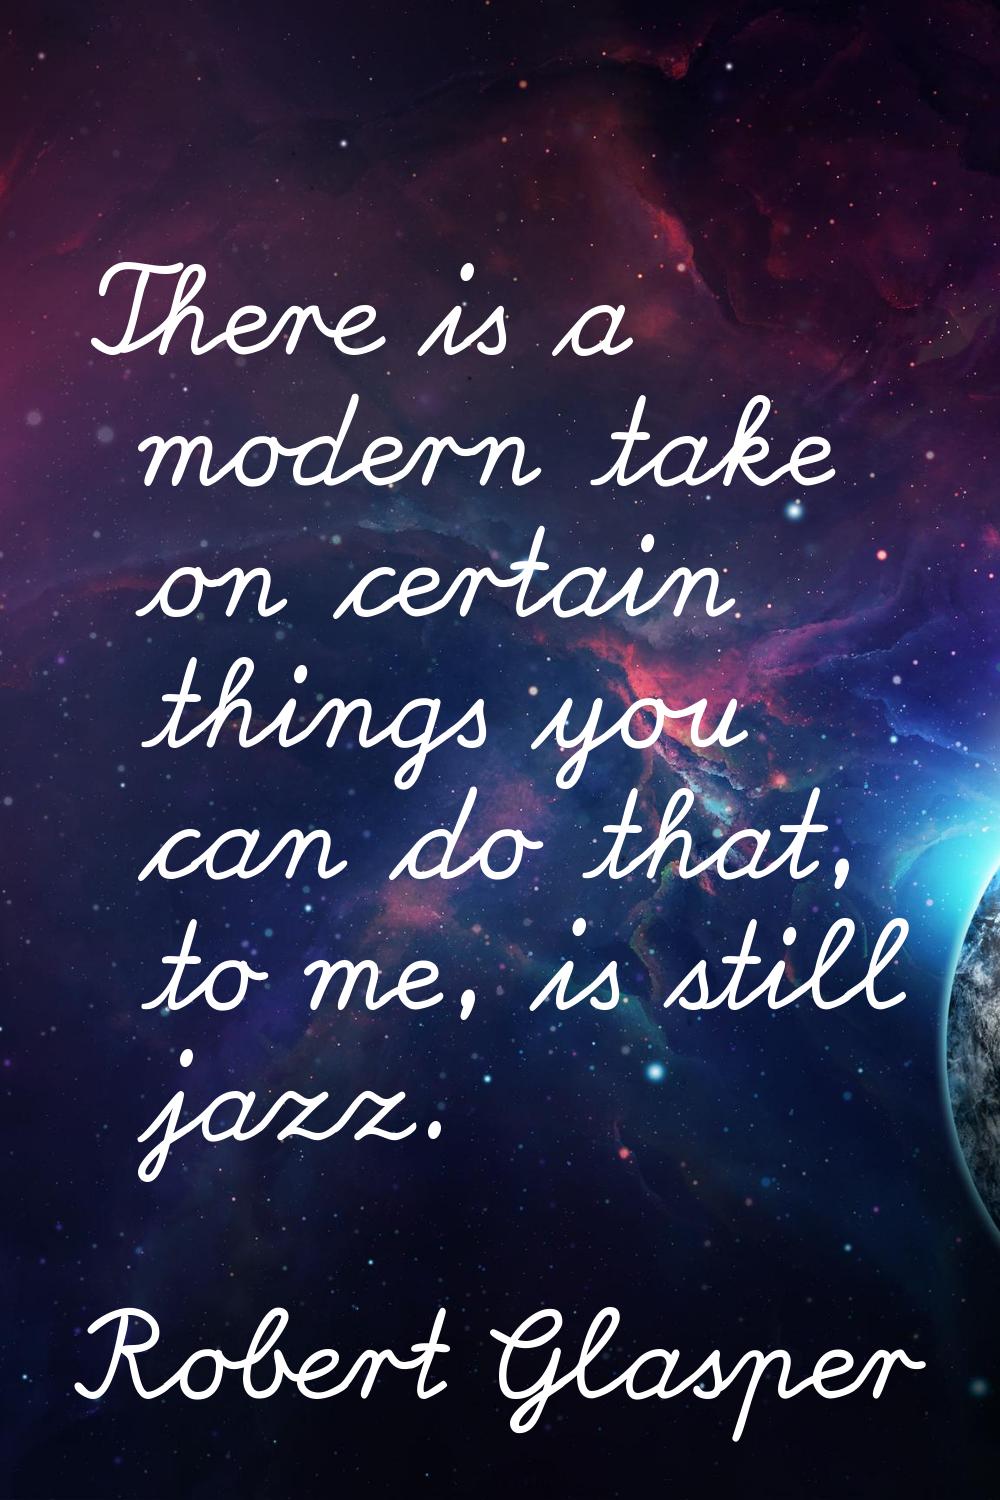 There is a modern take on certain things you can do that, to me, is still jazz.